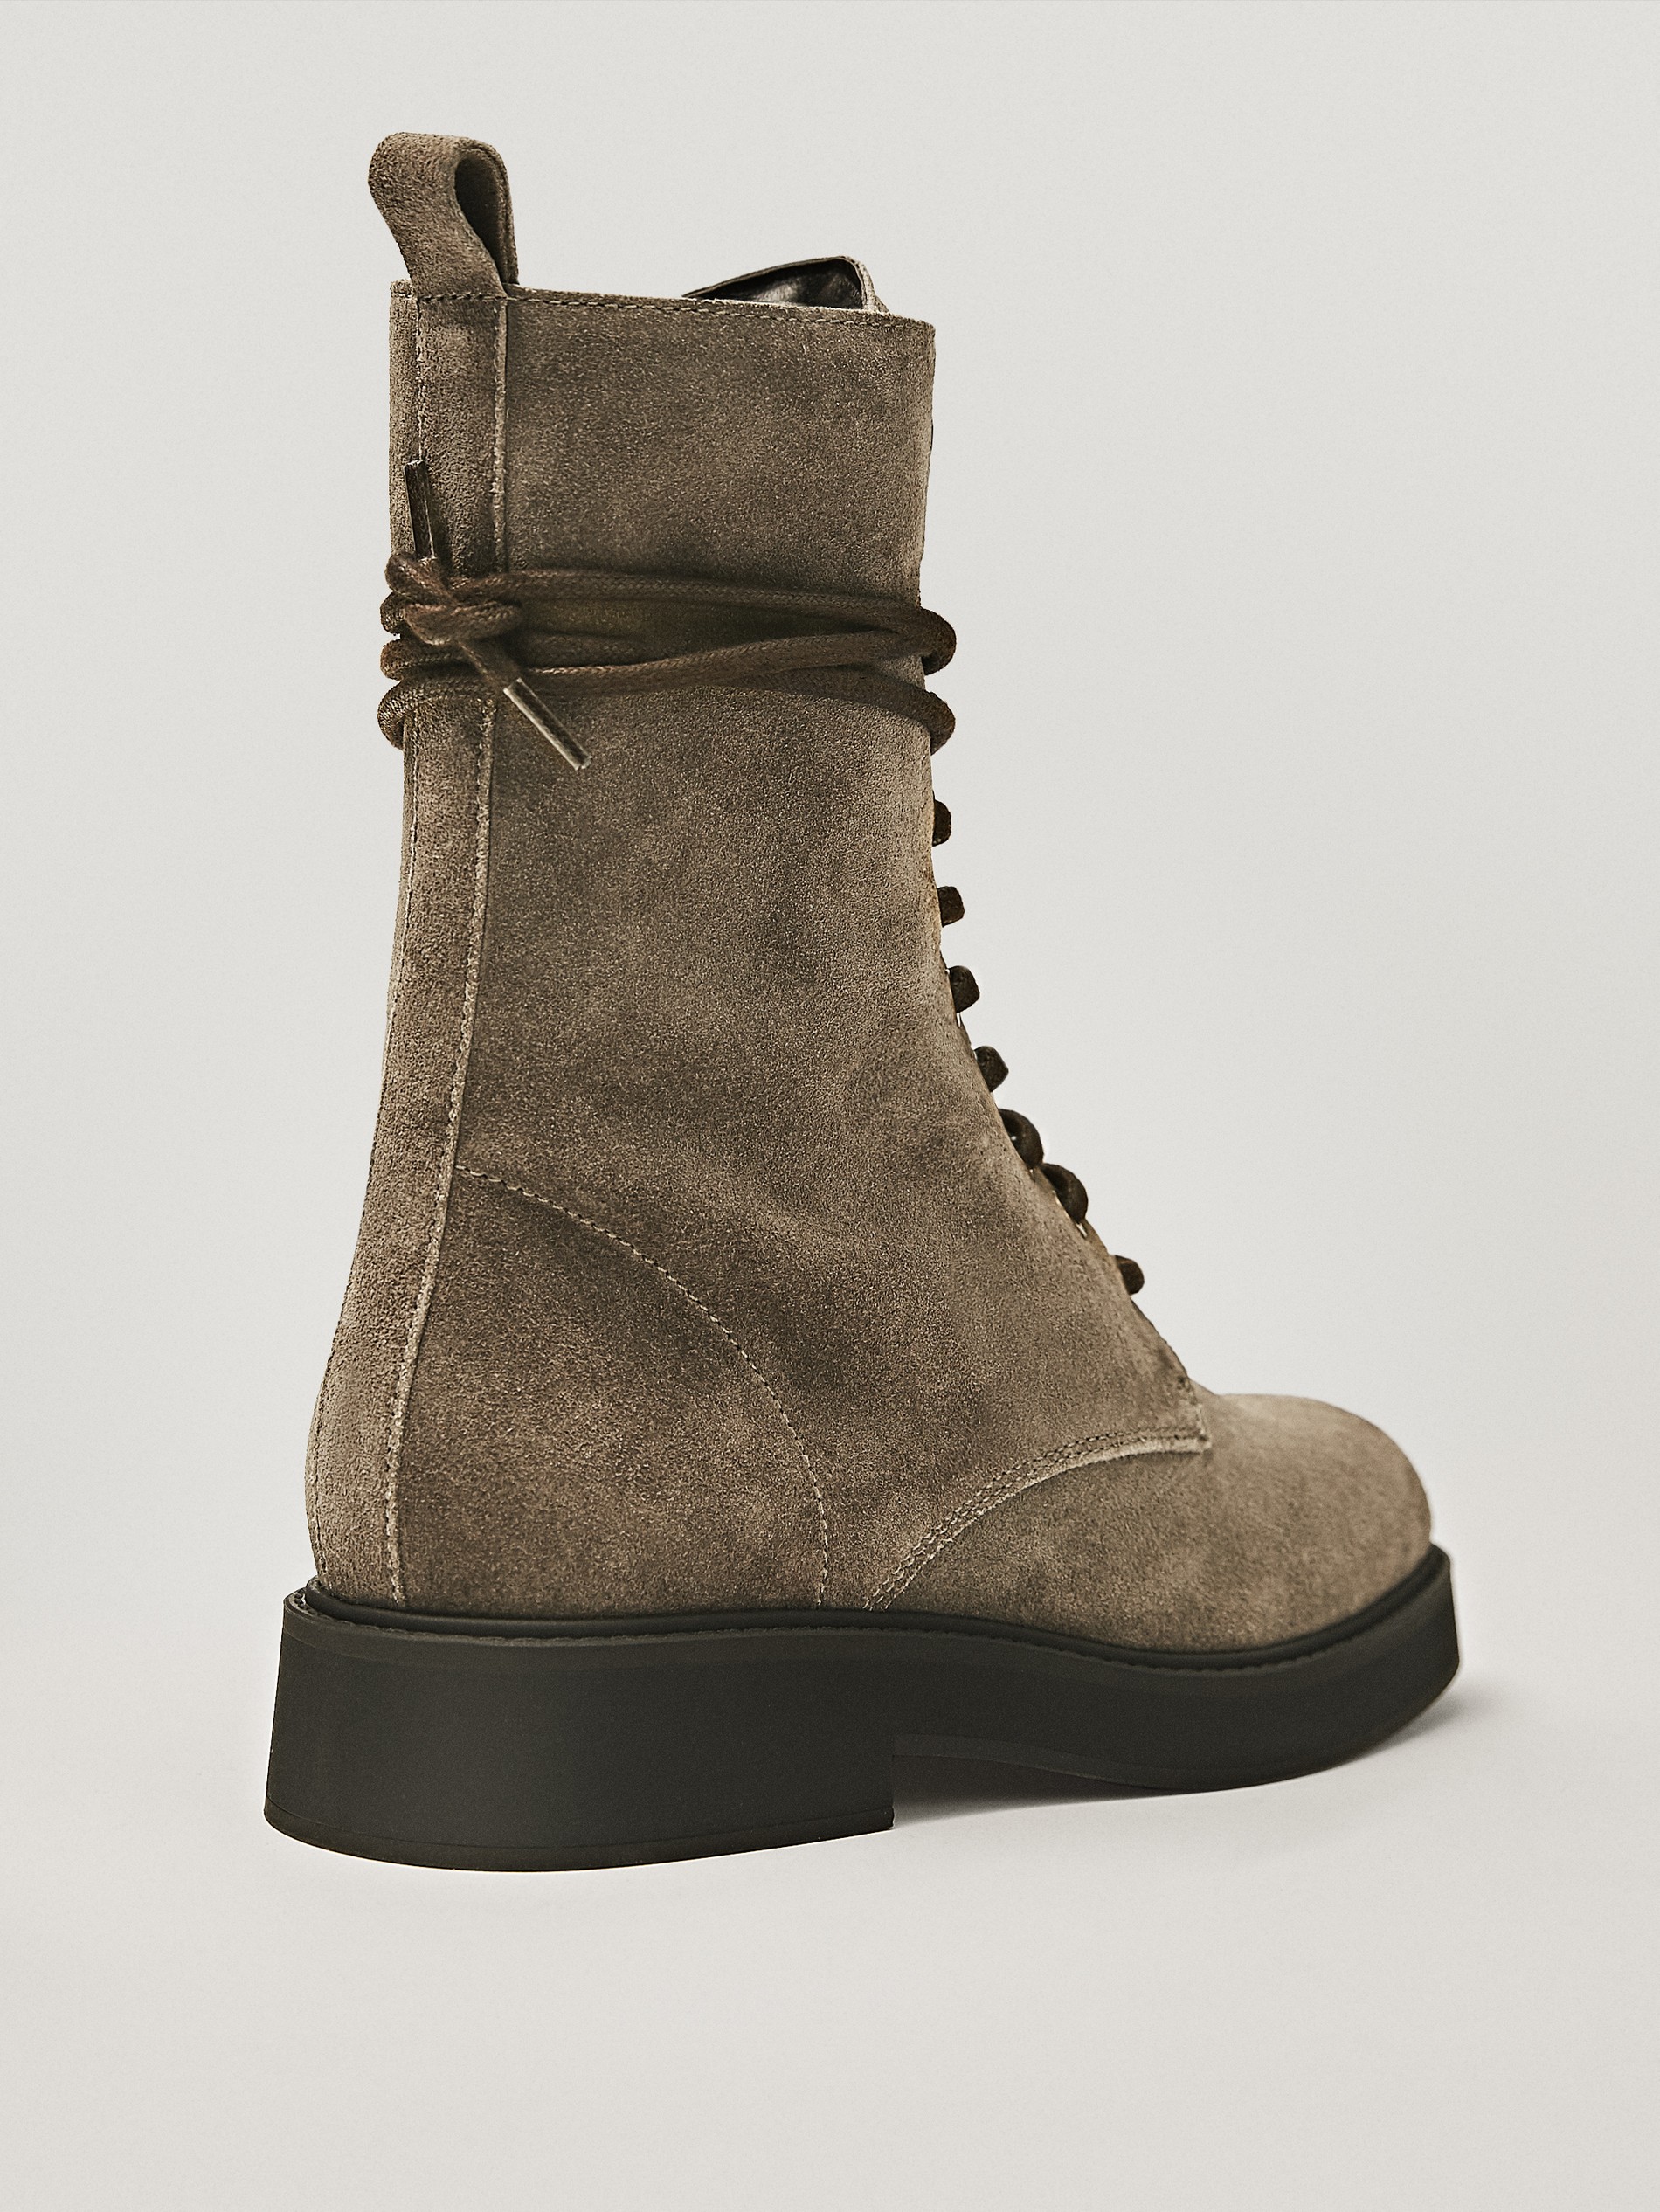 suede lace up boots womens